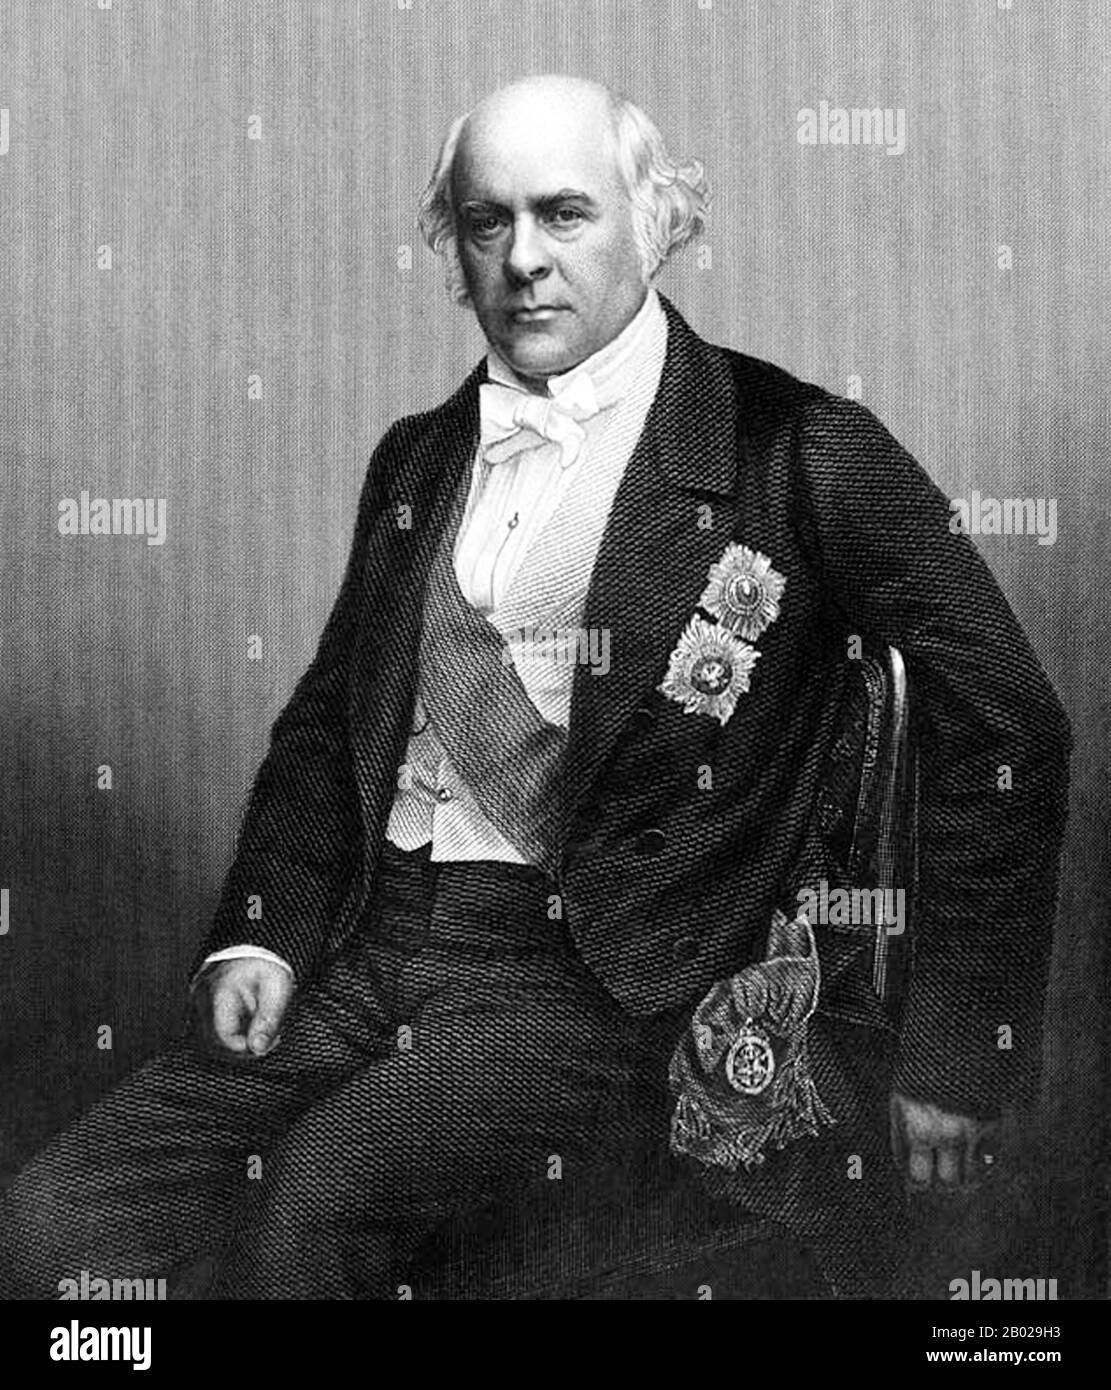 James Bruce, 8th Earl of Elgin and 12th Earl of Kincardine, KT, GCB, PC (20 July 1811 – 20 November 1863), was a British colonial administrator and diplomat. He was the Governor General of the Province of Canada, a High Commissioner in charge of opening trades with China and Japan, and Viceroy of India. Stock Photo